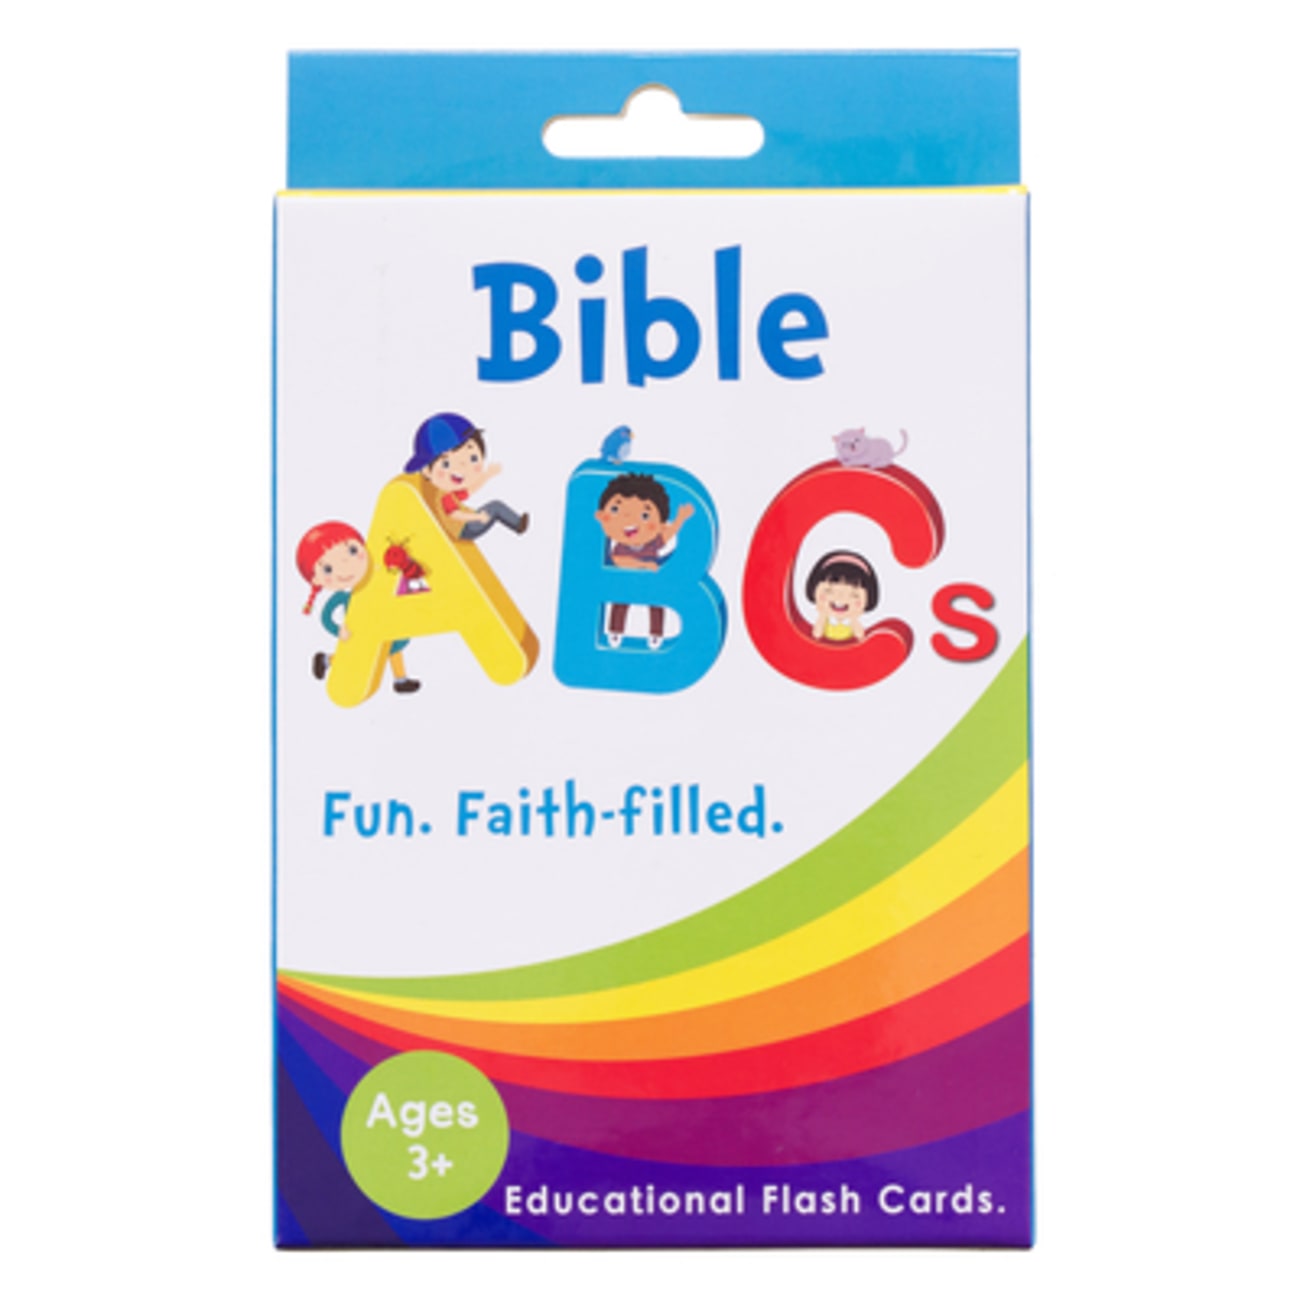 Bible Abc's Boxed Cards (Flash Cards) Box